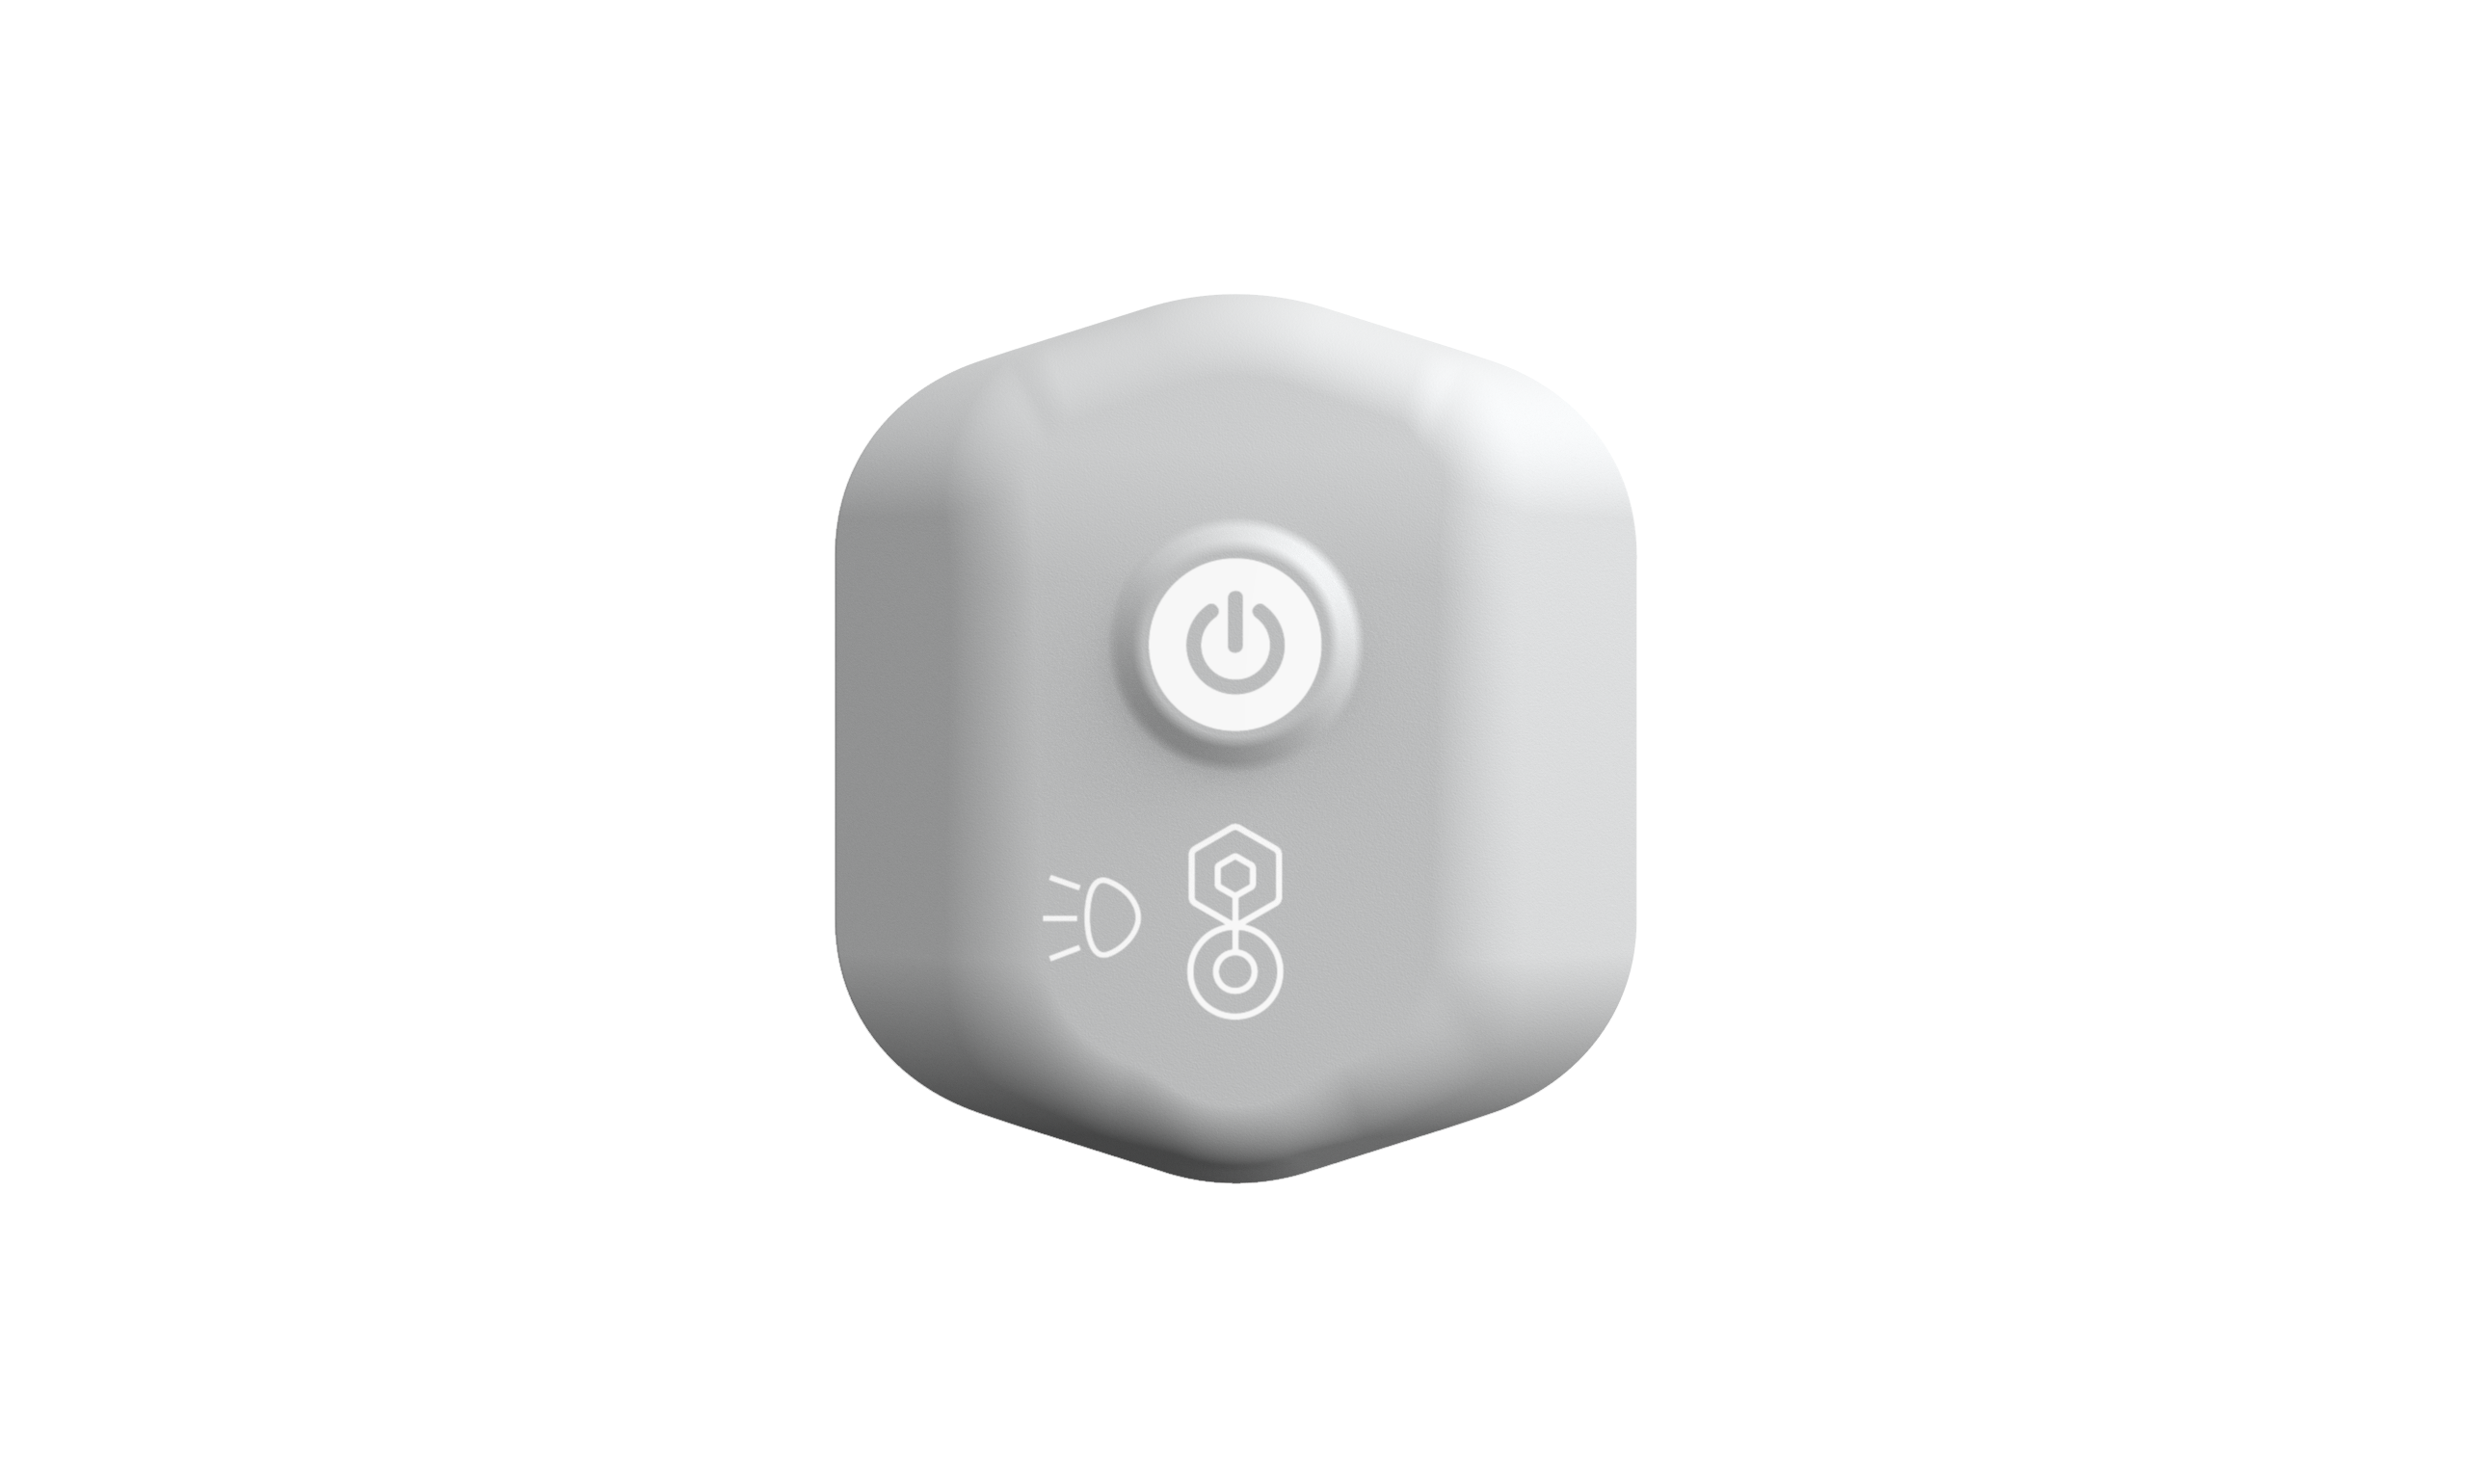 The BioButton medical grade device and data services are offered by BioIntelliSense, a continuous health monitoring and clinical intelligence company, based in Golden, Colo. The coin-sized wearable device provides an effortless user experience and delivers continuous vital sign monitoring of temperature, respiratory rate and heart rate at rest.